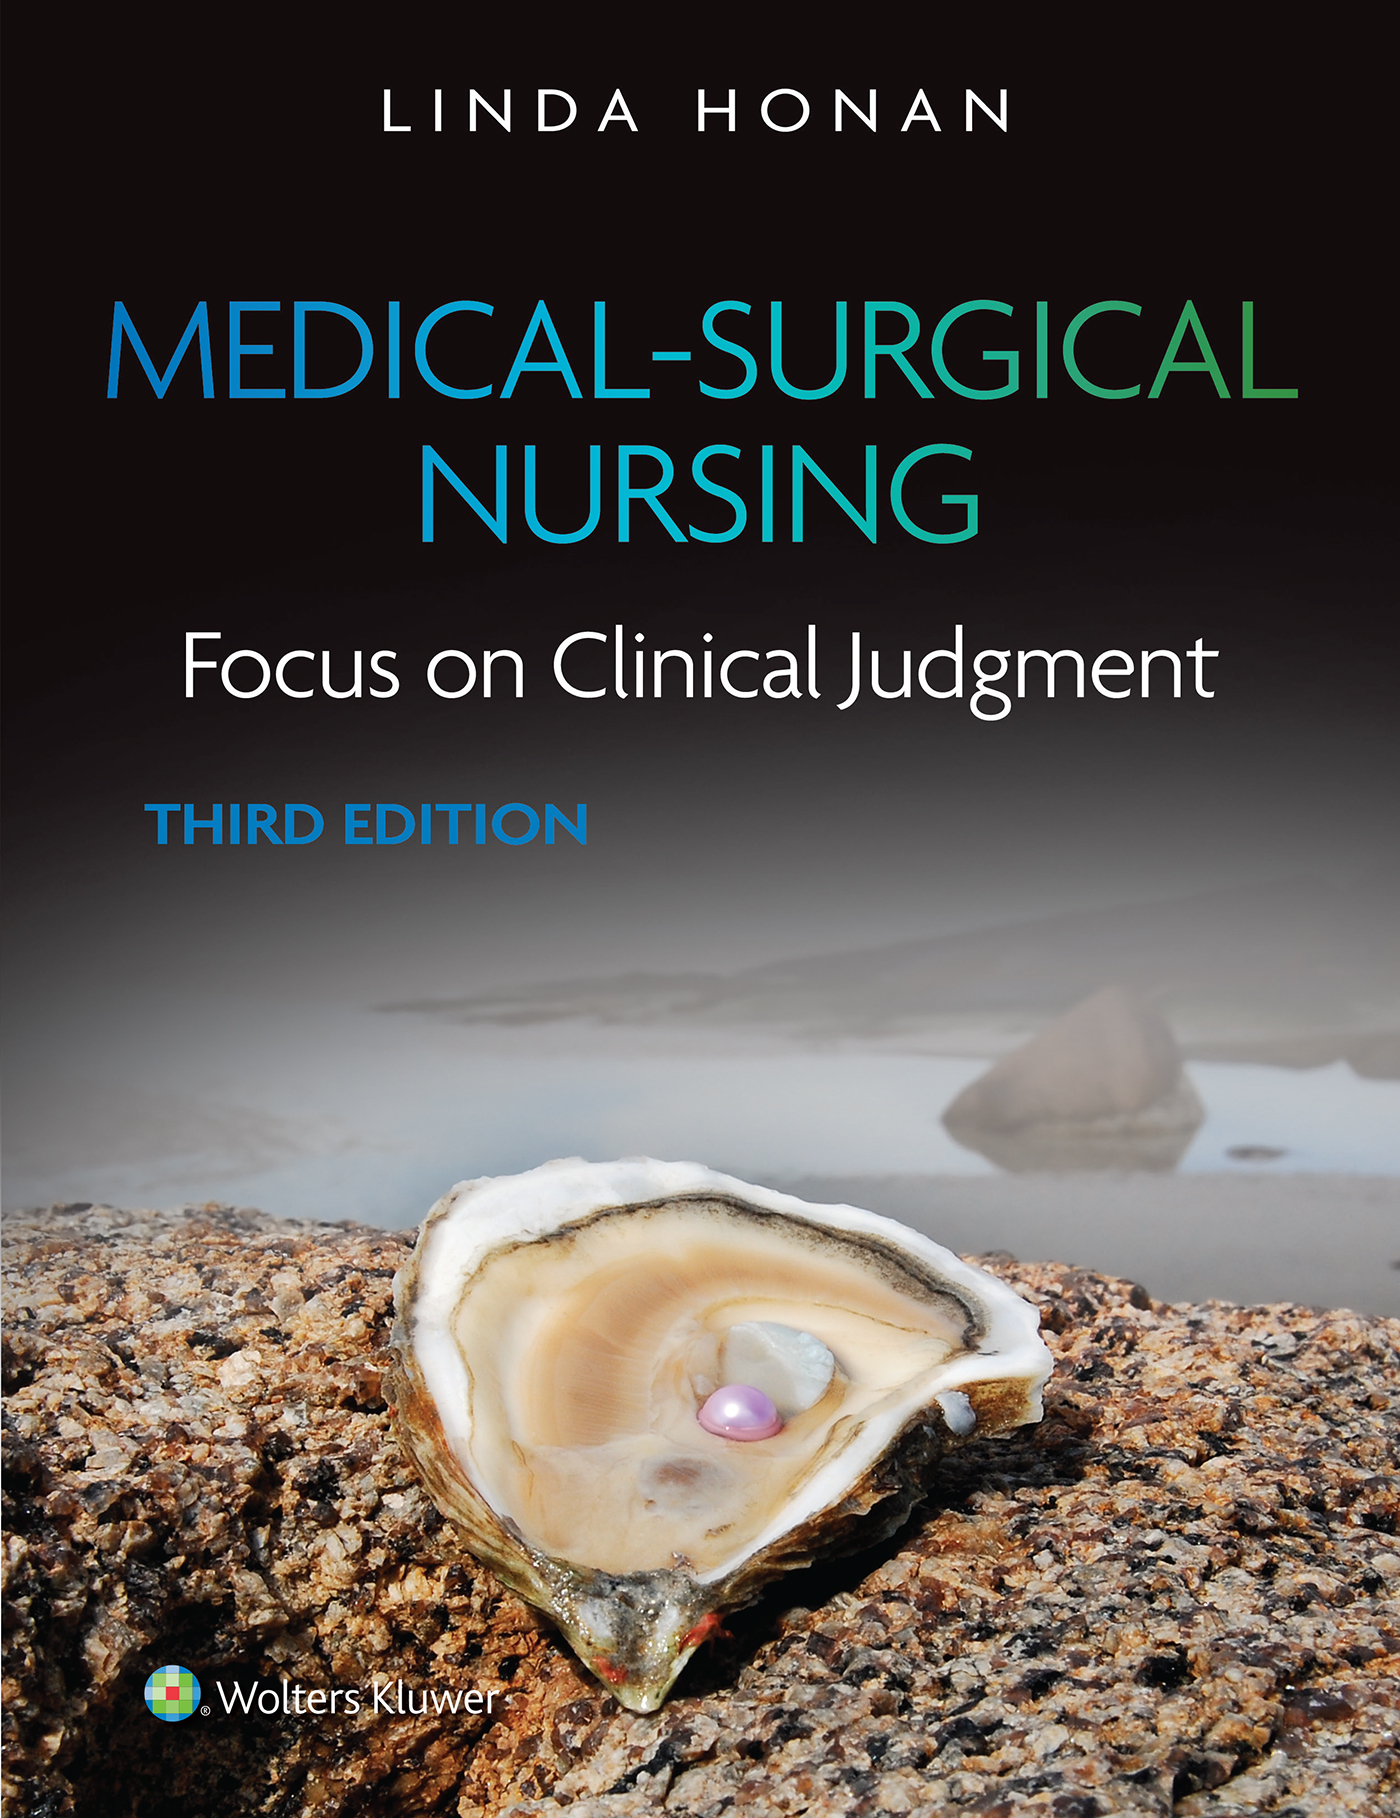 Medical-Surgical Nursing: Focus on Clinical Judgment, 3rd Edition